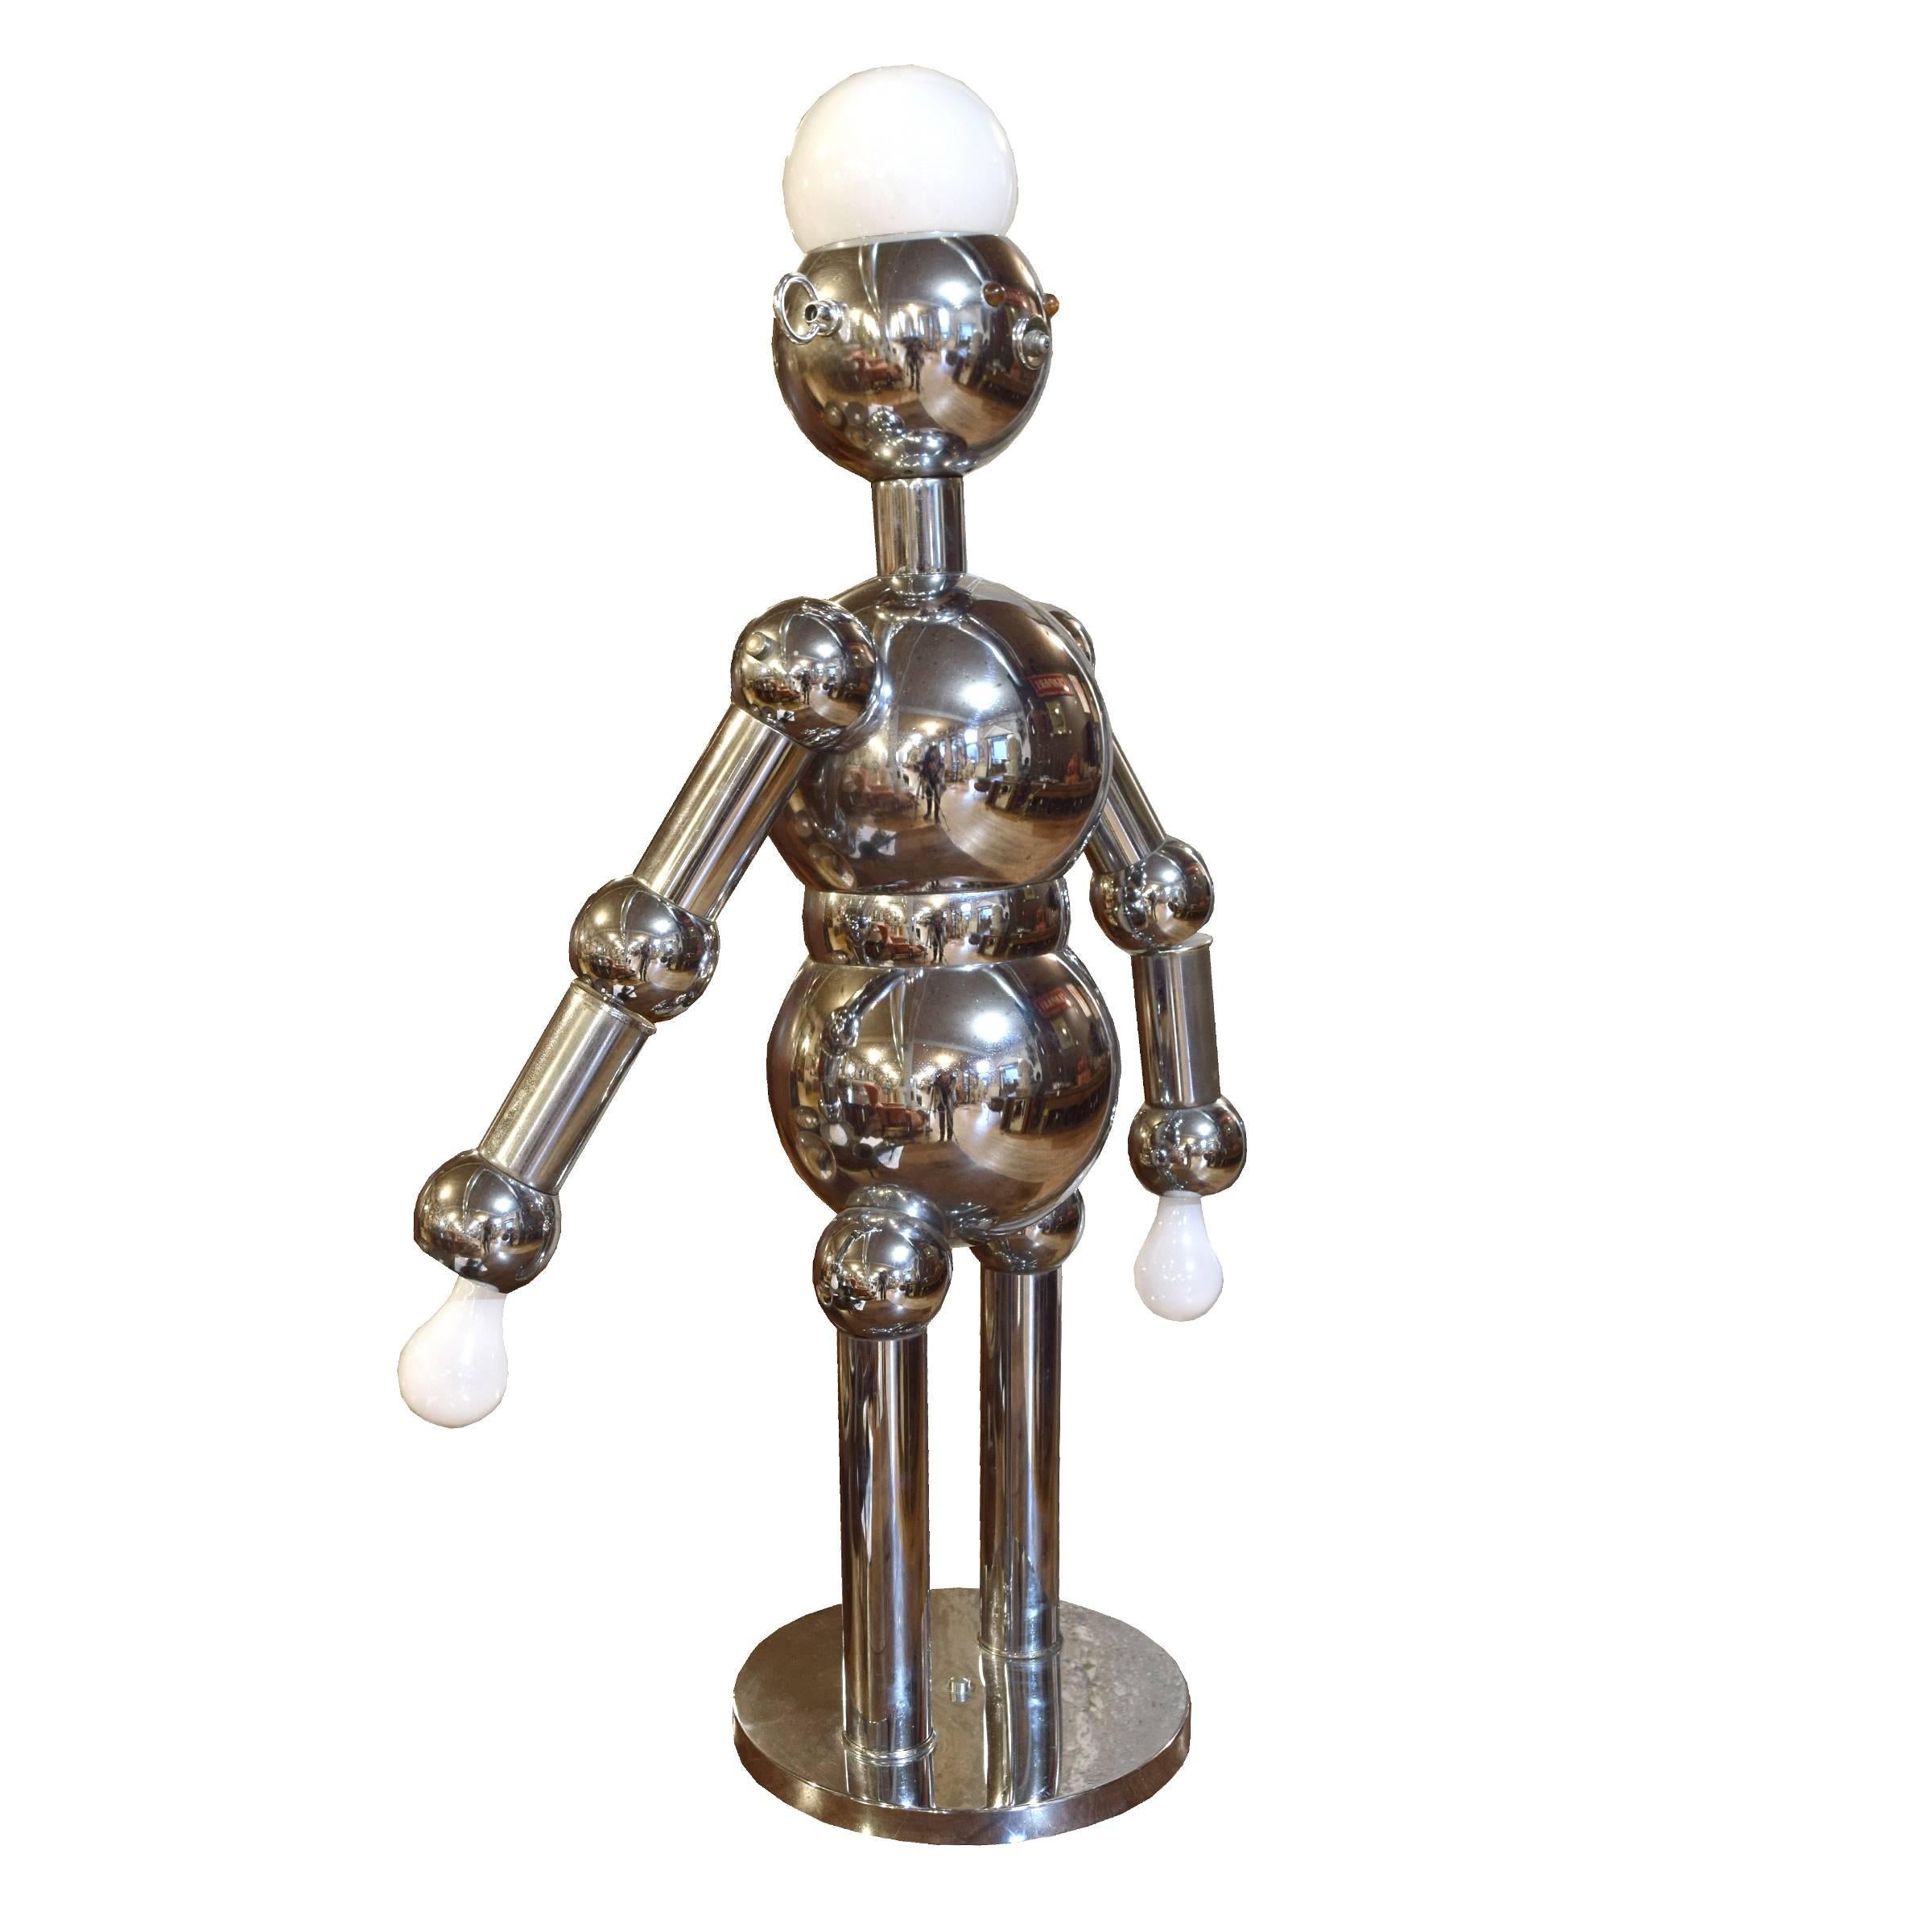 A very fun chrome robot lamp by Torino Lamp Company of Italy. Standing just over 3 feet tall, this is the largest model in their robot lamp series and features a large bulb in the head and articulated arms with bulbs in each hand, circa 1960s.
  